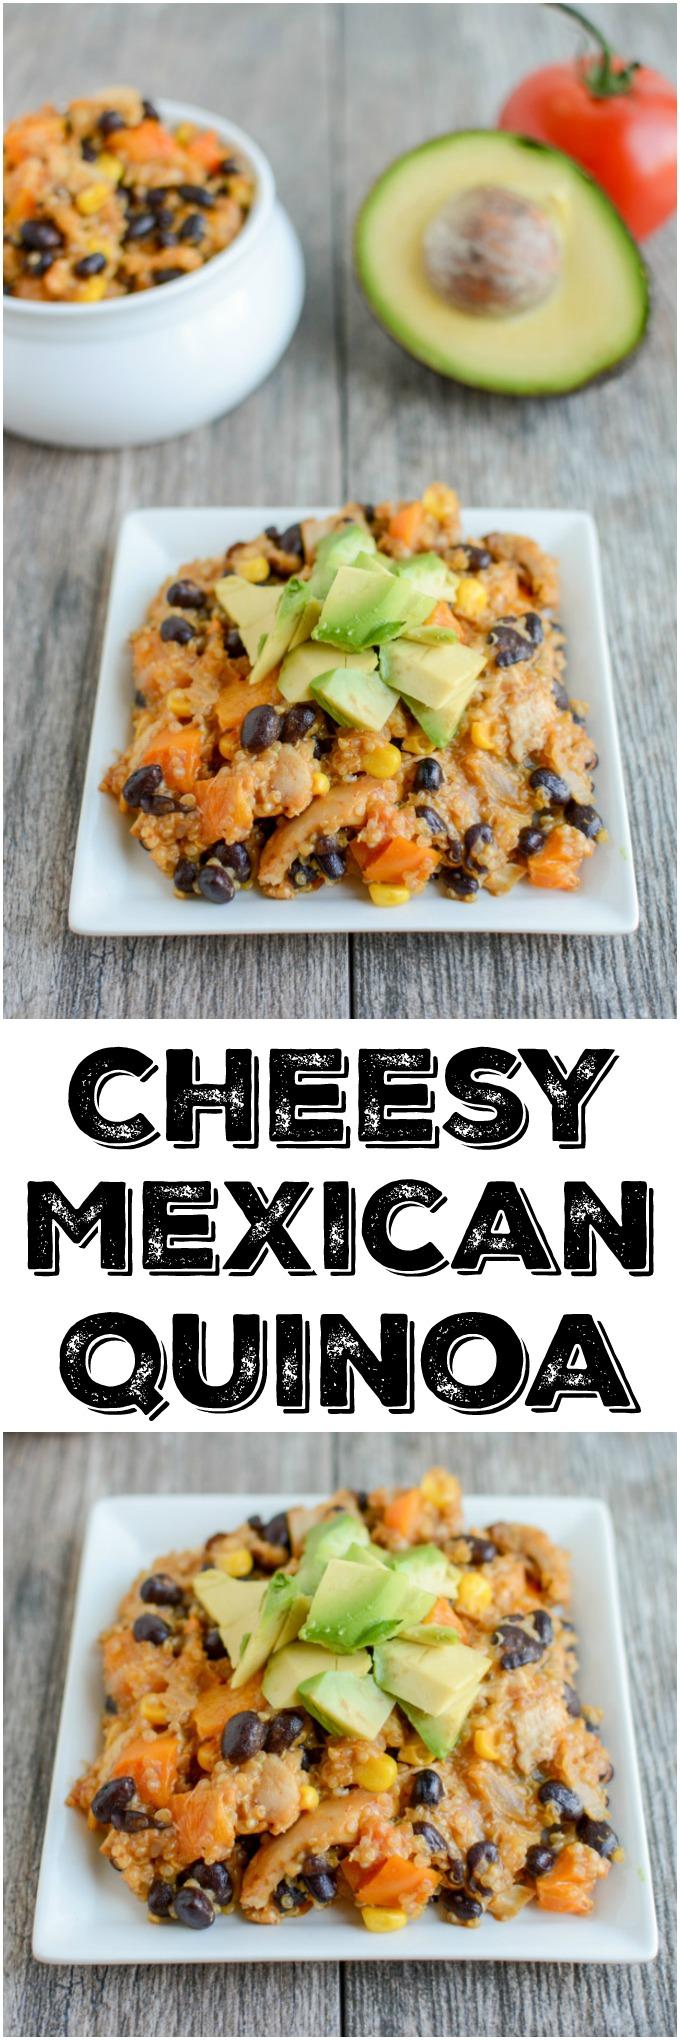 This Cheesy Mexican Quinoa recipe is perfect for a quick, healthy dinner. Make it vegetarian or add some leftover chicken and customize with your favorite vegetables!